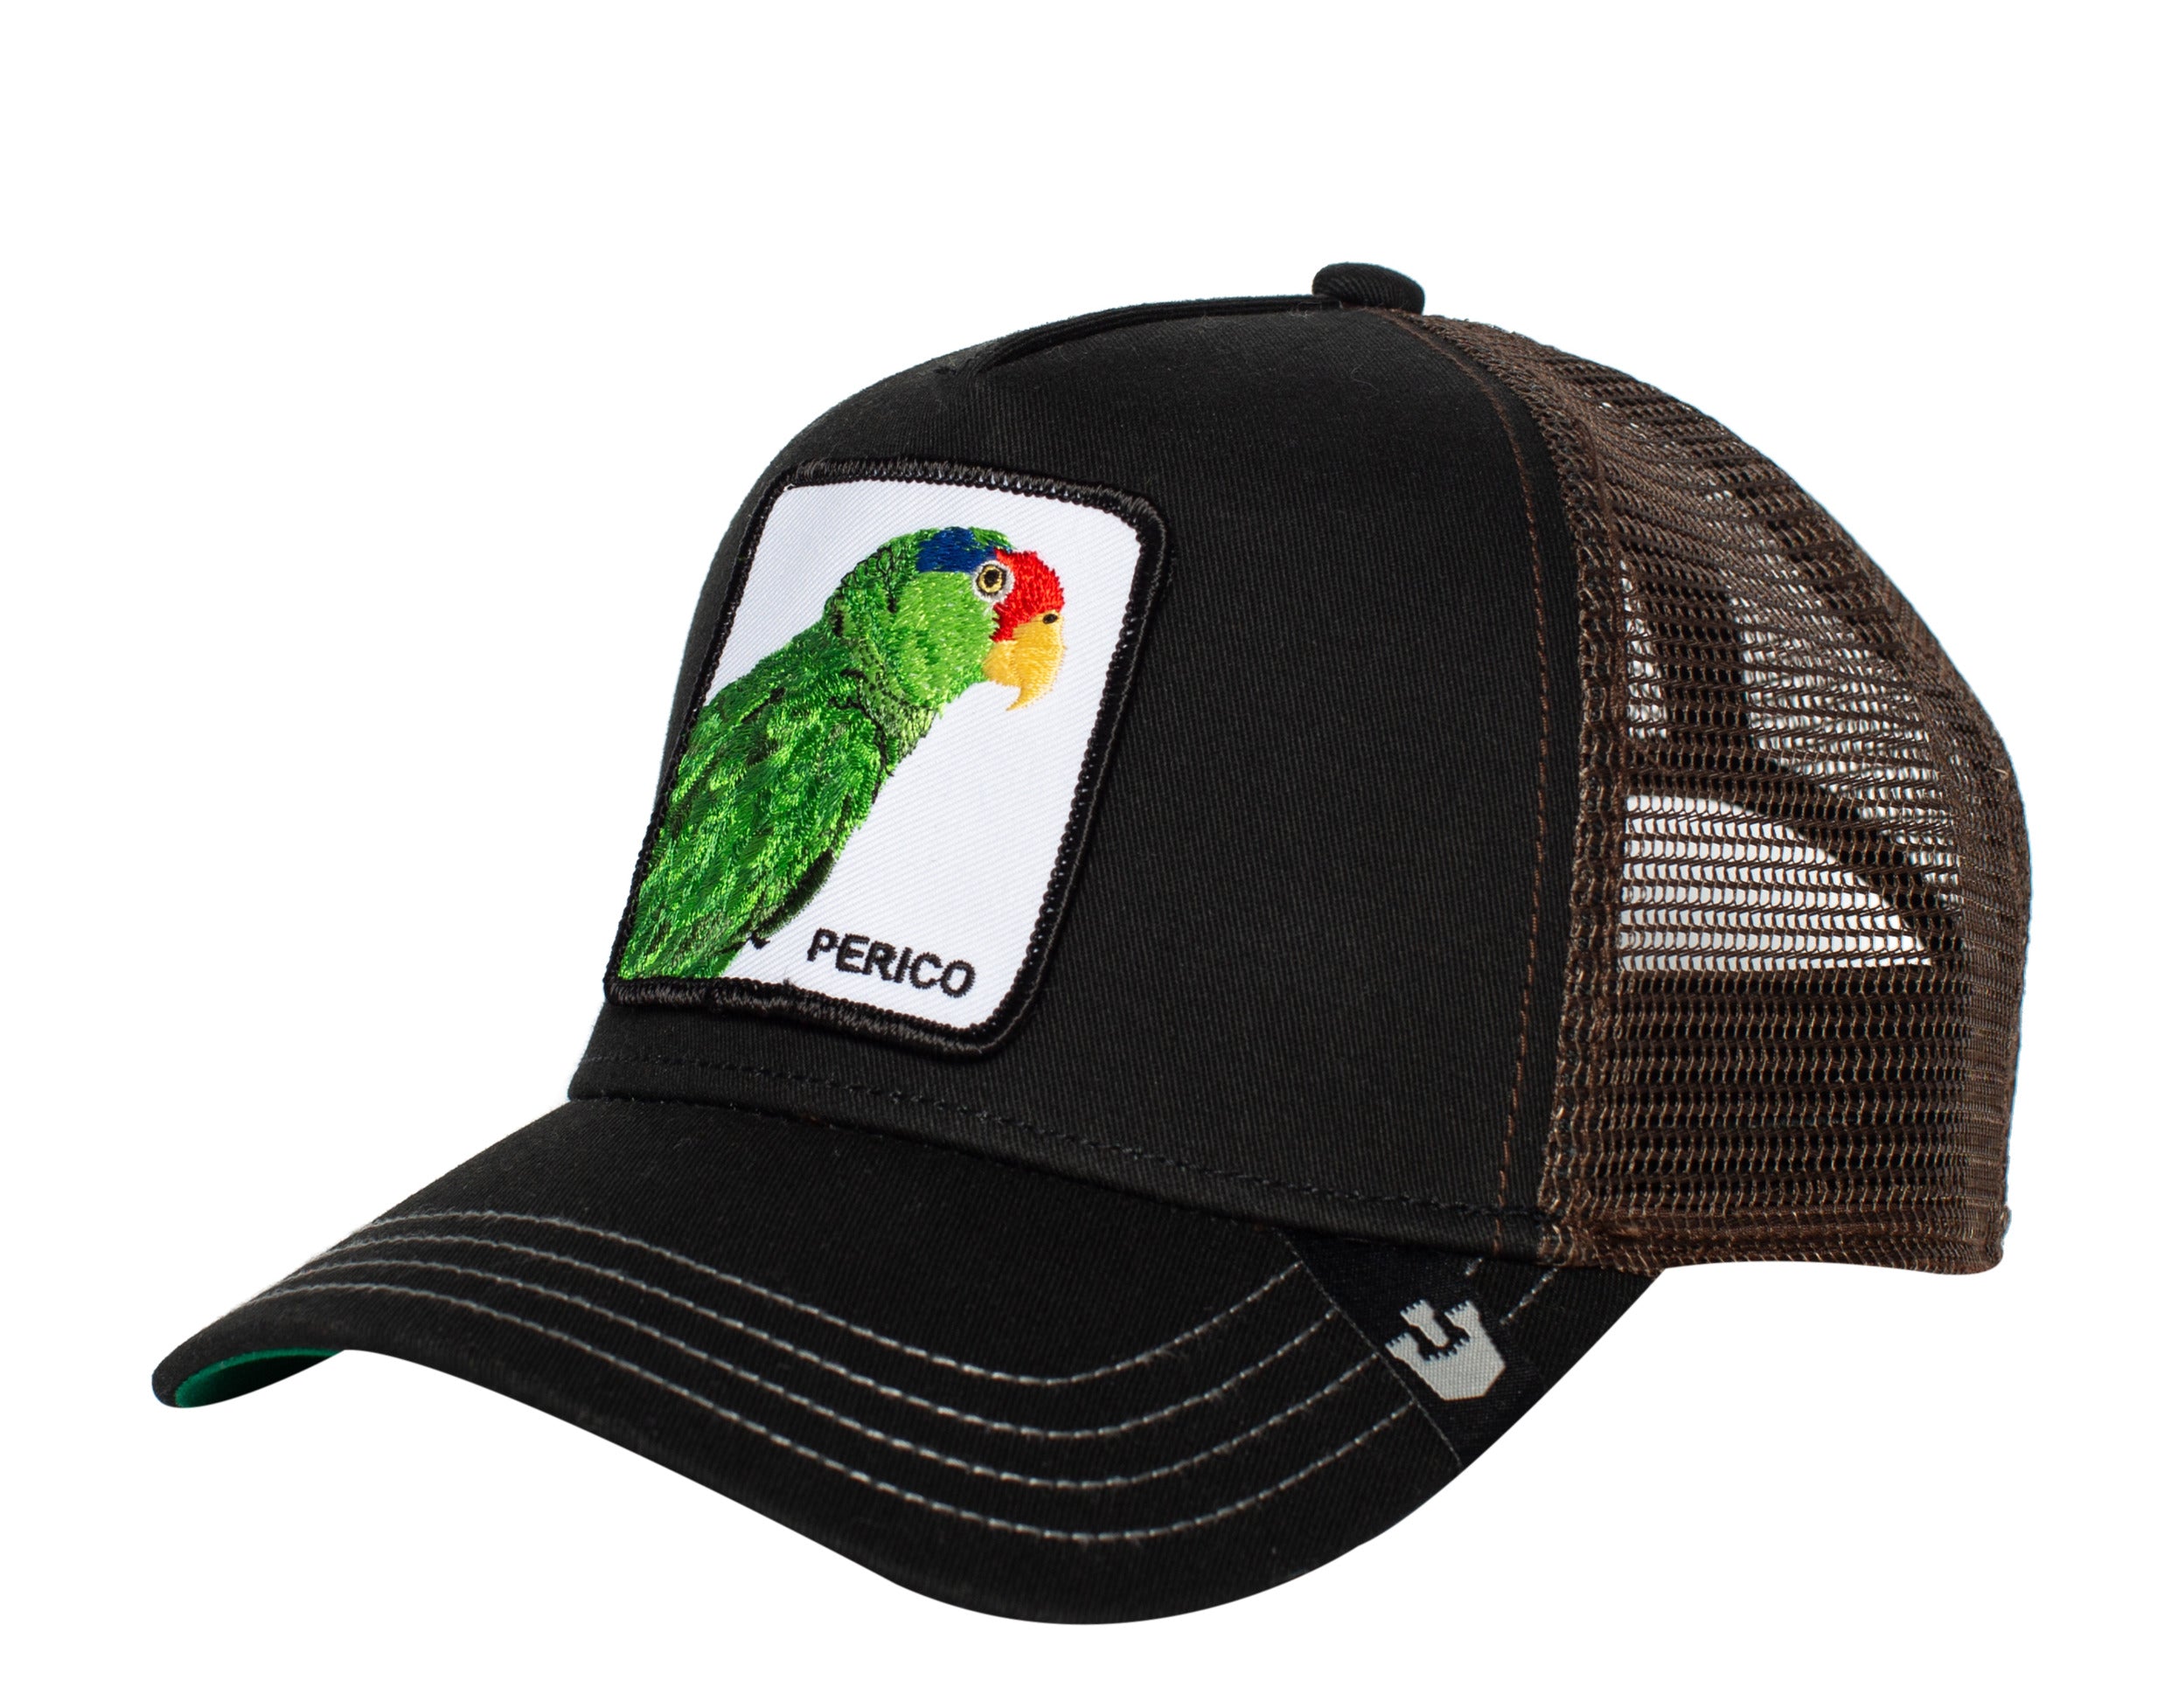 Goorin Bros Baseball Cap Birds the Word with Embroidered Parrot